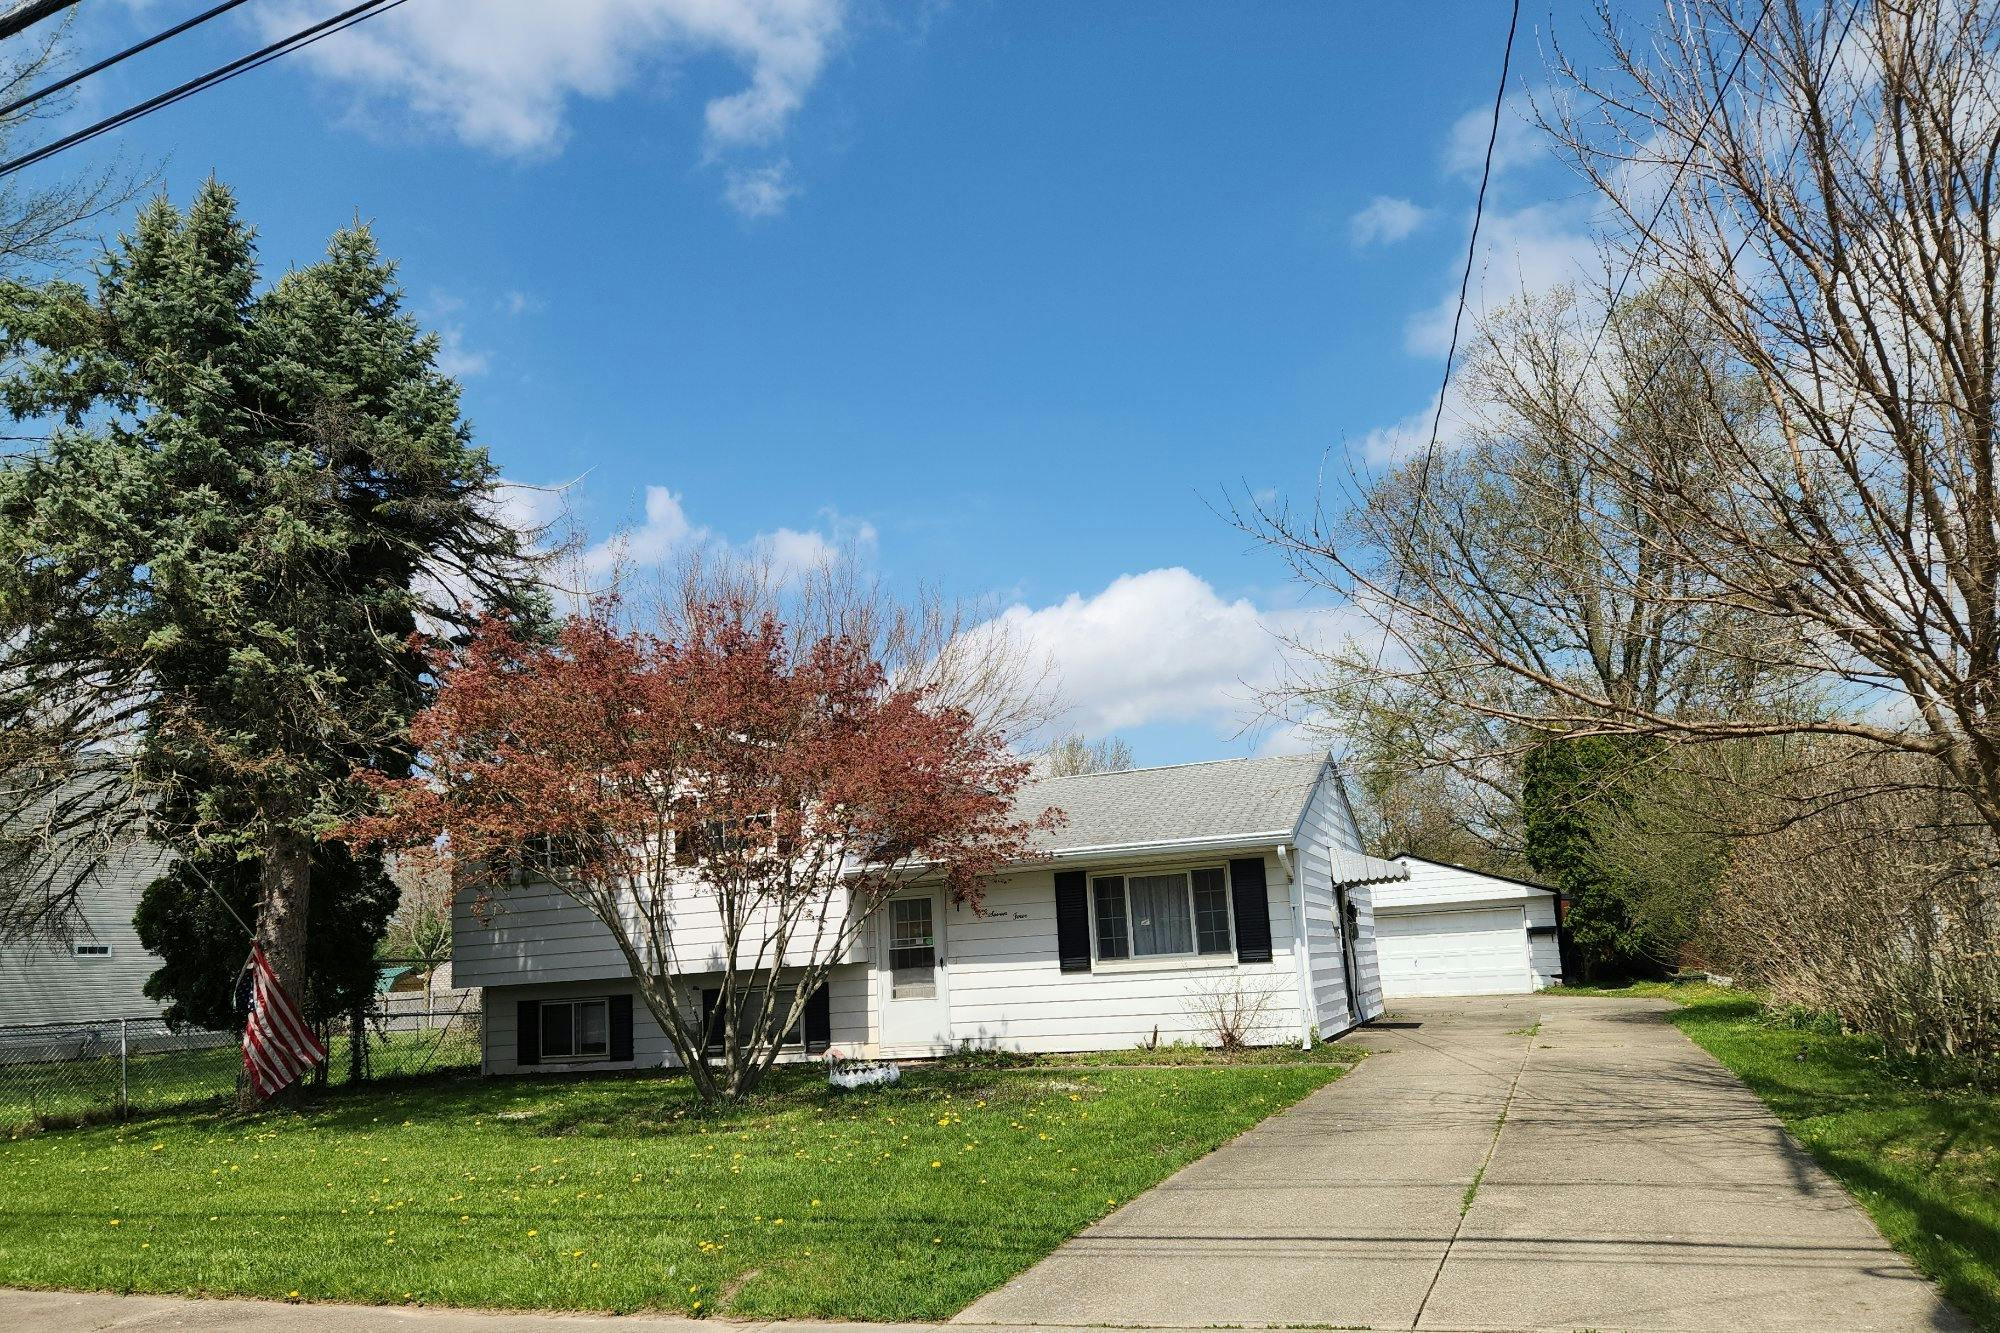 Warden Ave, Elyria, OH 44035 #1